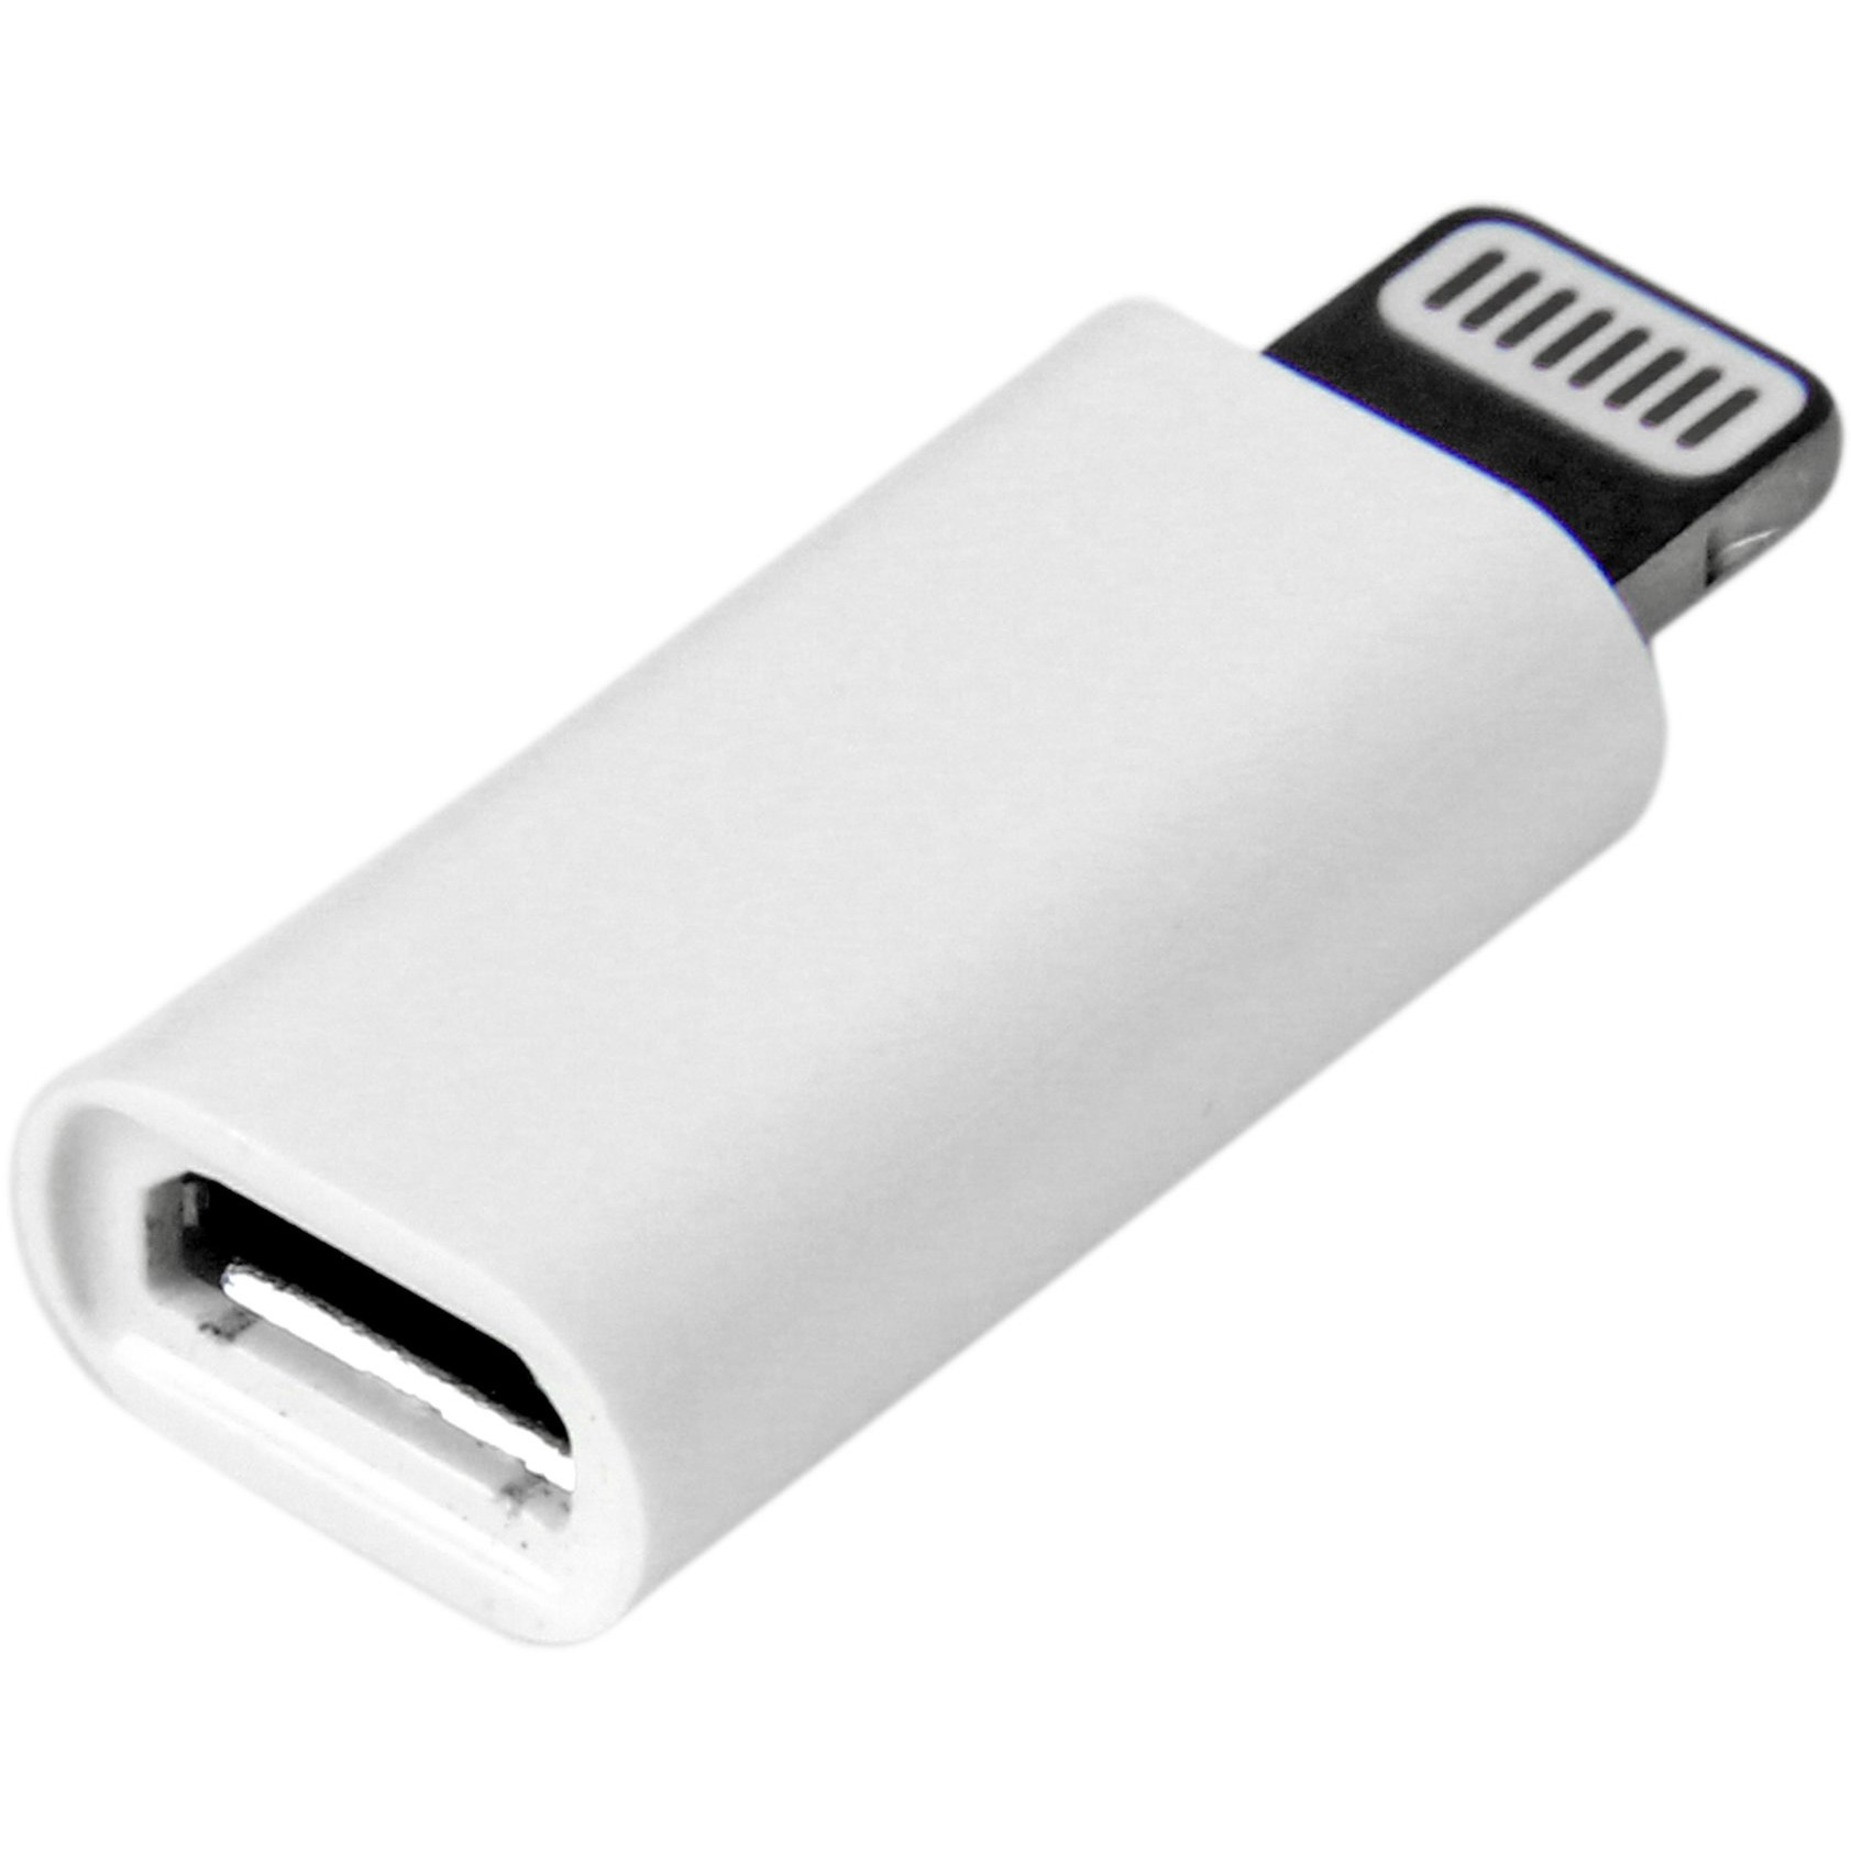 Startech .com White Apple Lightning Connector to Micro USB Adapter for iPhone / iPod / iPadCharge or Sync your iPhone, iPod, or iPad... USBUBLTADPW Corporate Armor